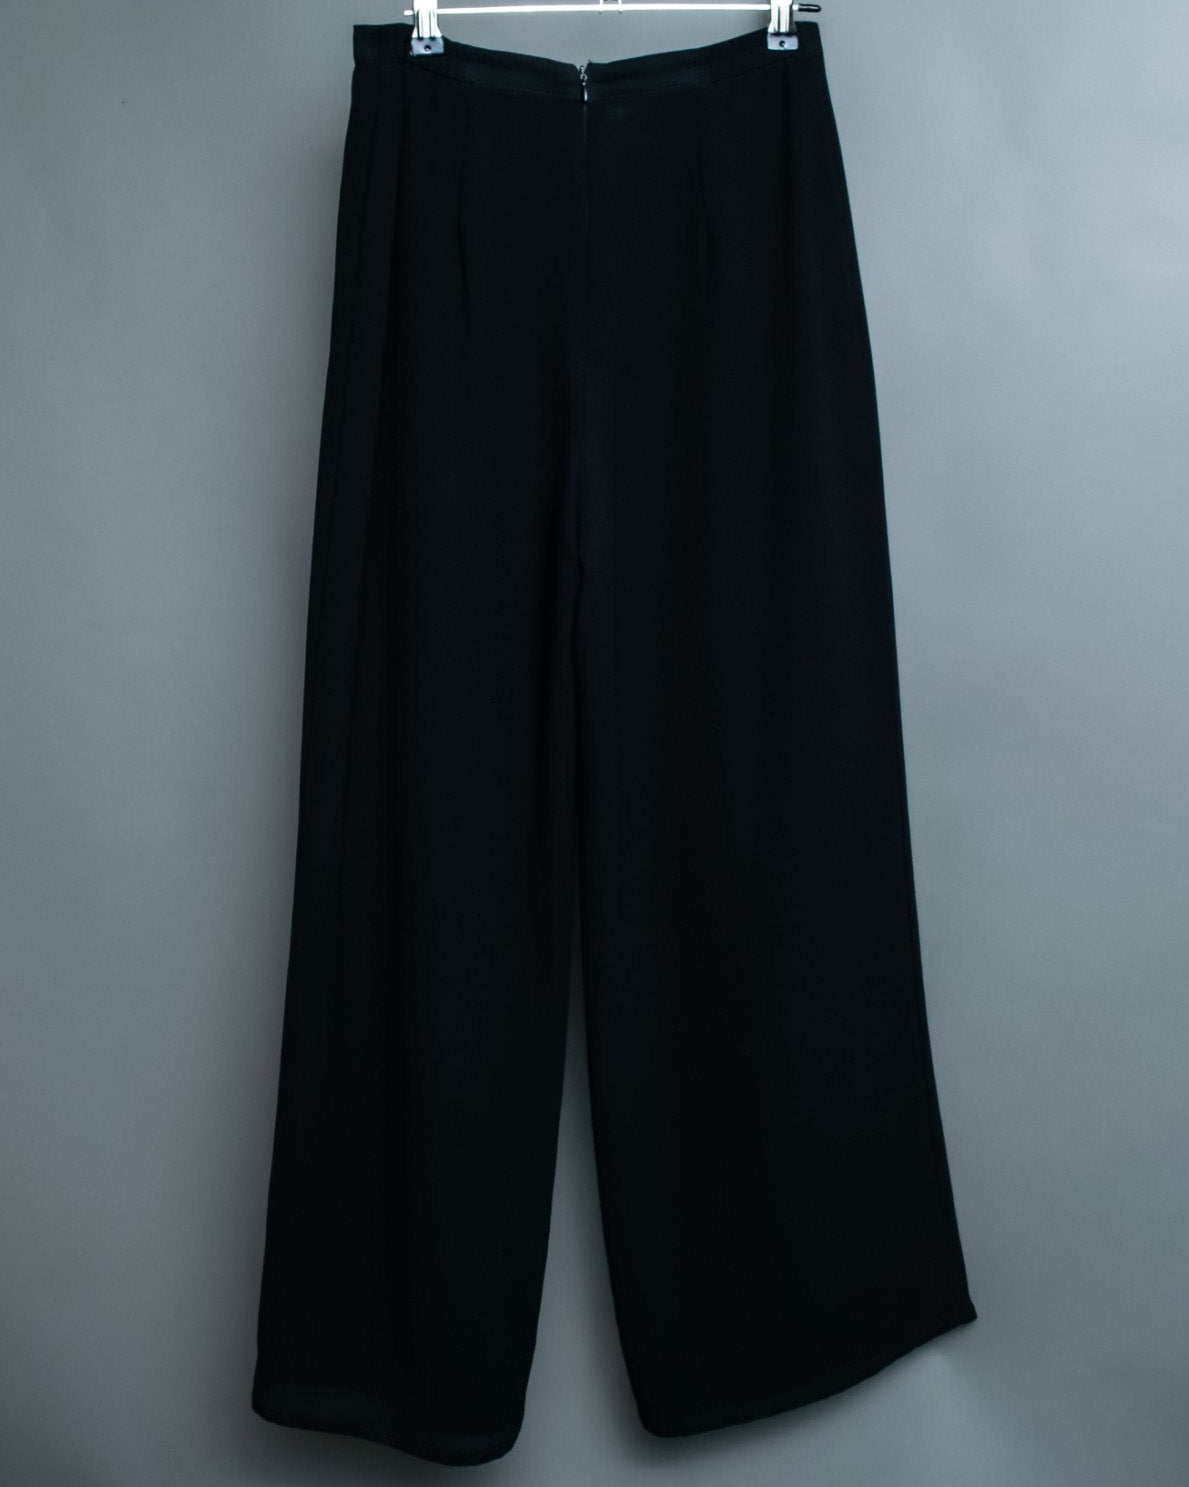 Double Fabric Design Lame Flare Pants